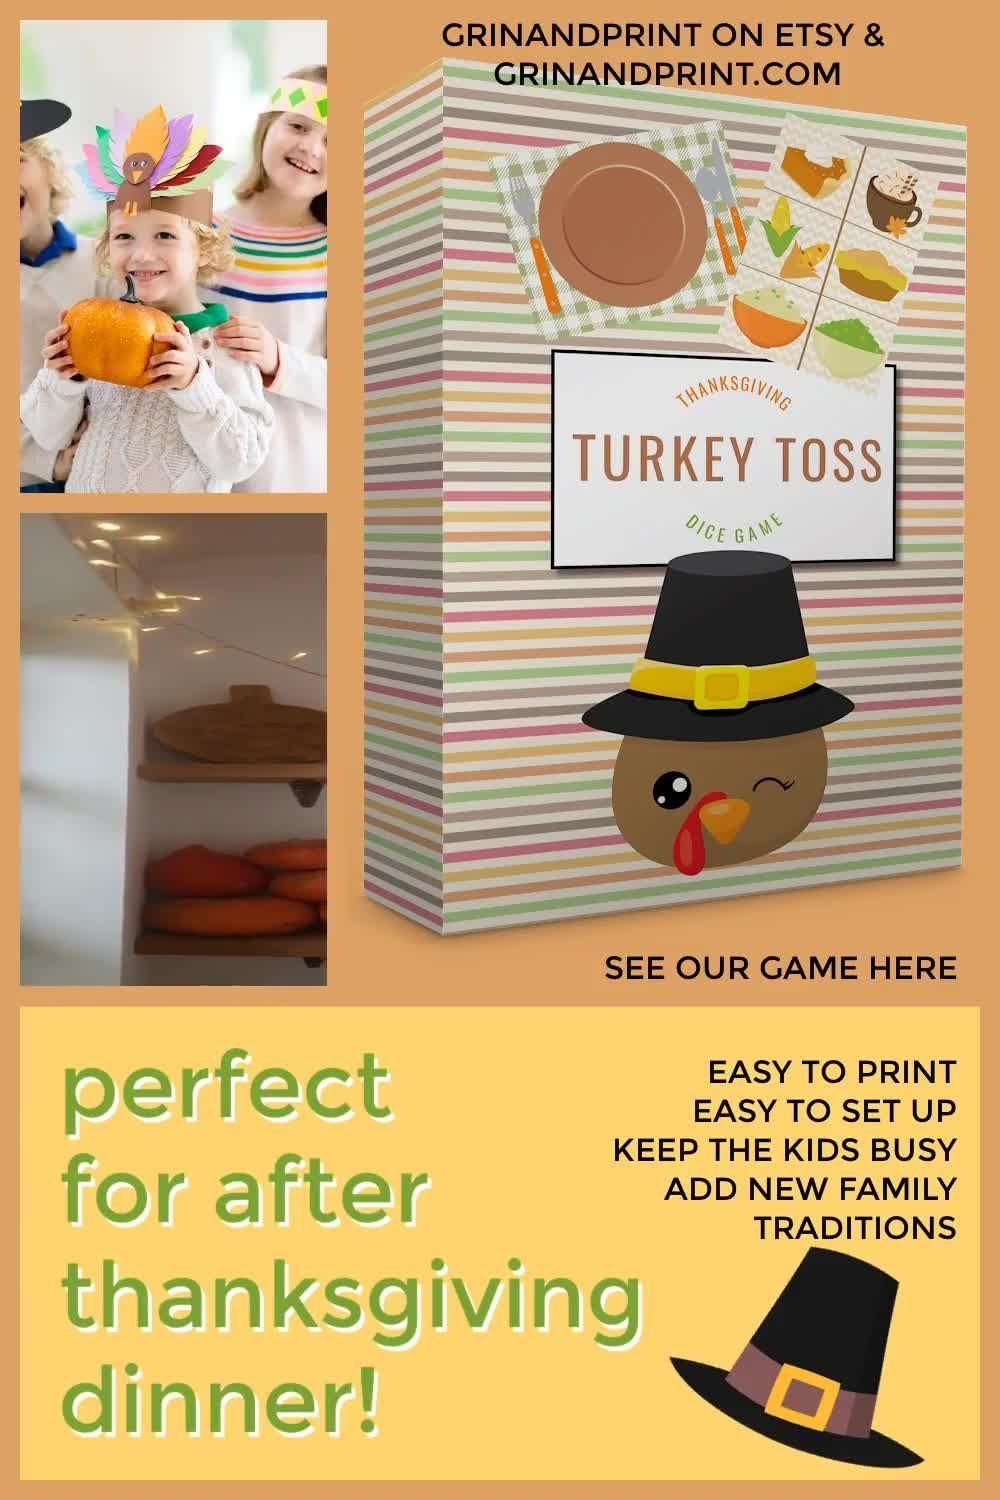 Fun Thanksgiving Ideas / Thanksgiving Games and Traditions / Fun Thanksgiving Games -   17 diy thanksgiving centerpieces for kids ideas